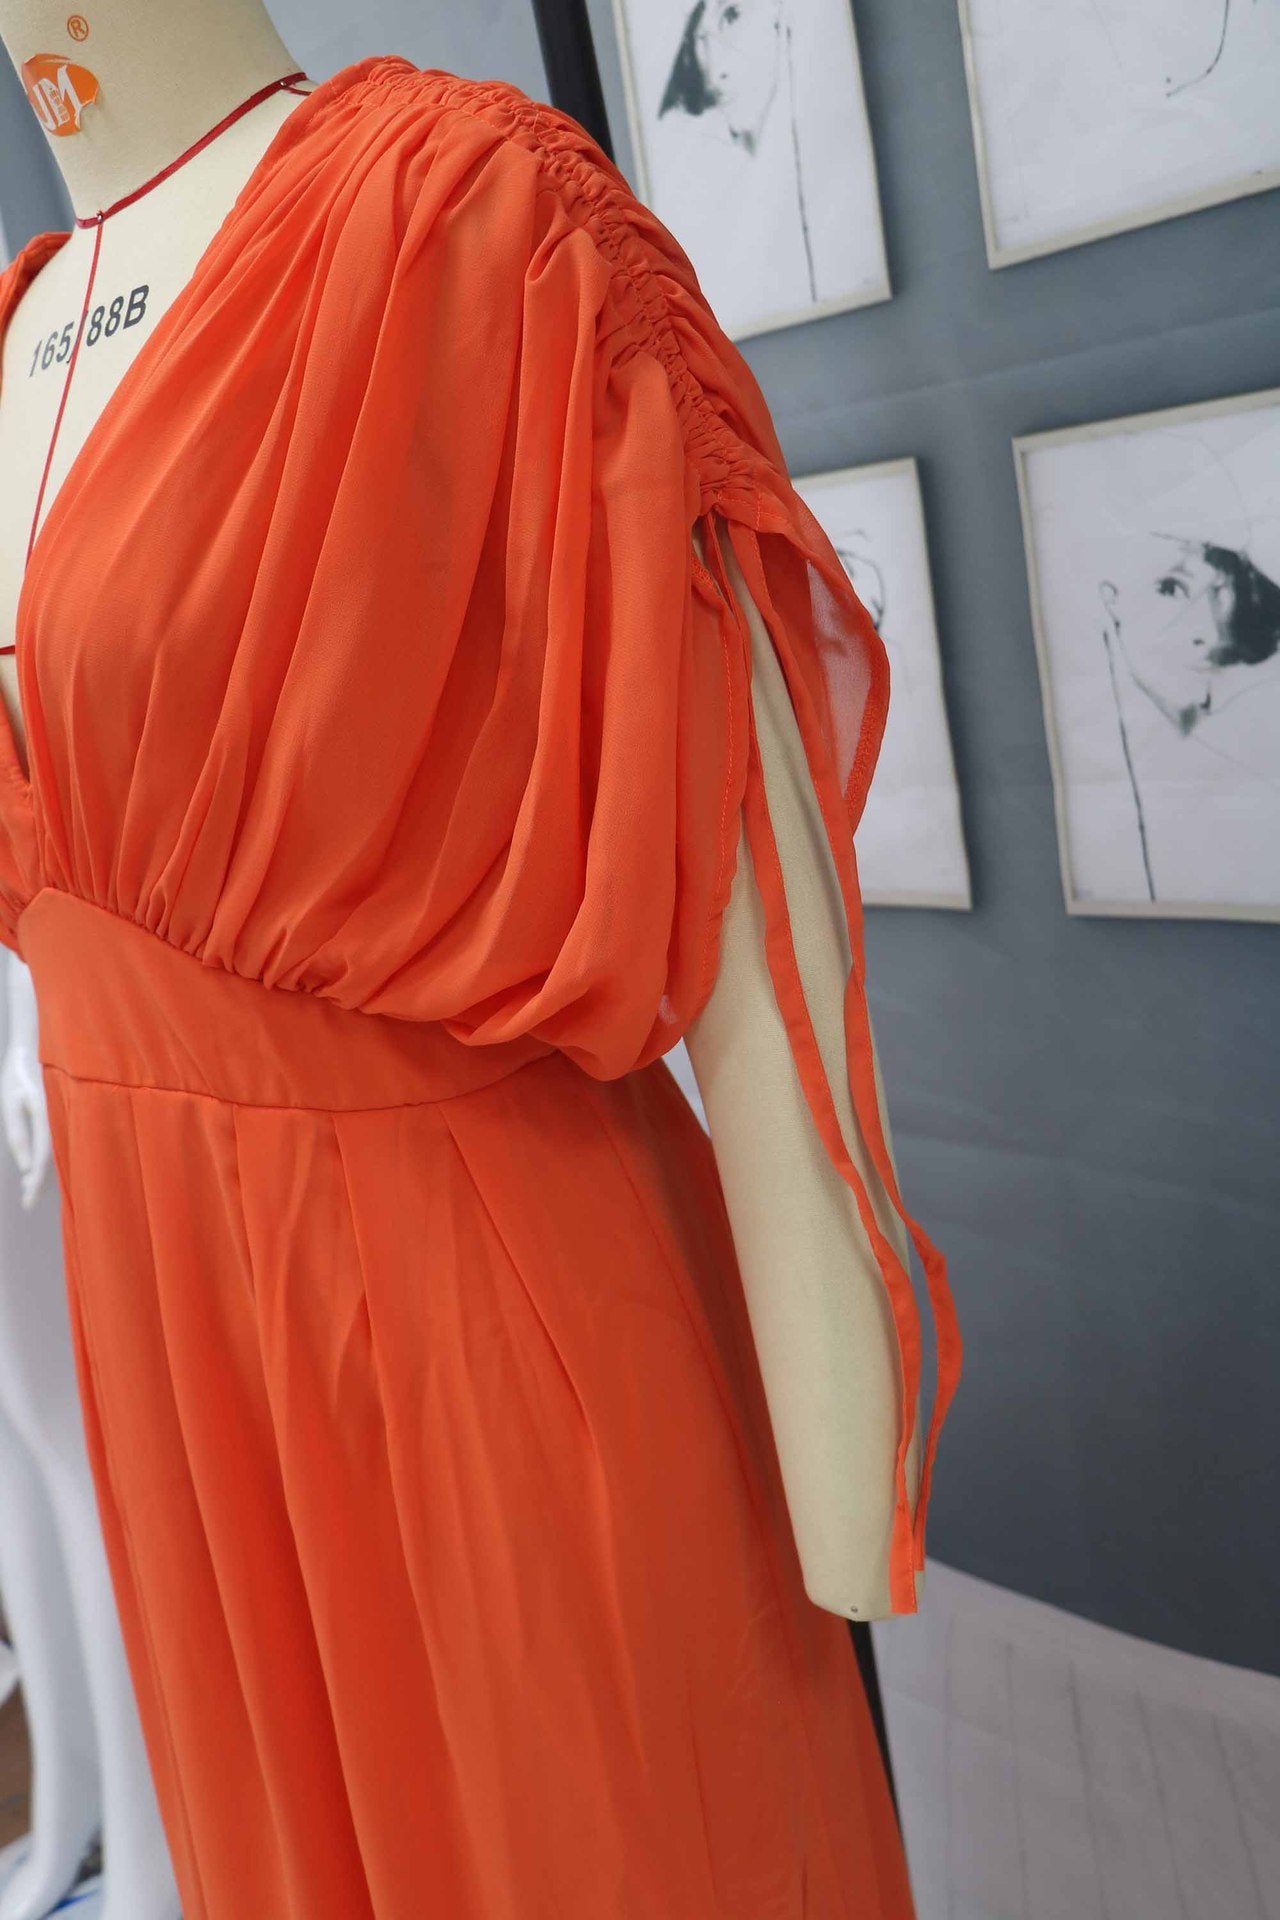 New Orange Chiffion Long Dresses-Maxi Dresses-Free Shipping at meselling99